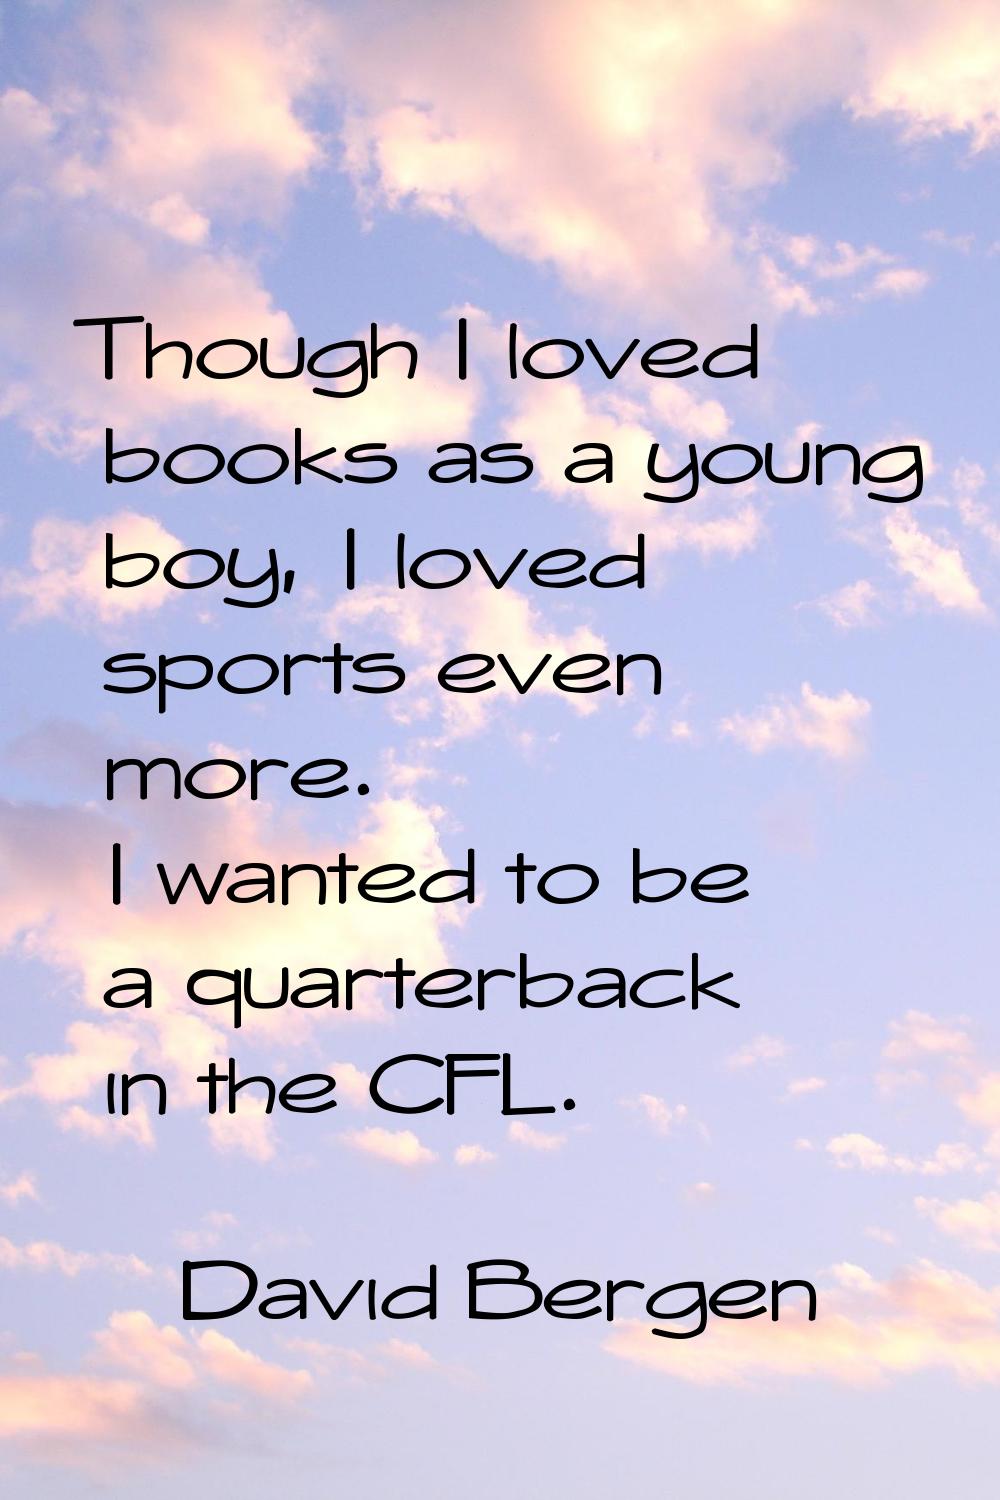 Though I loved books as a young boy, I loved sports even more. I wanted to be a quarterback in the 